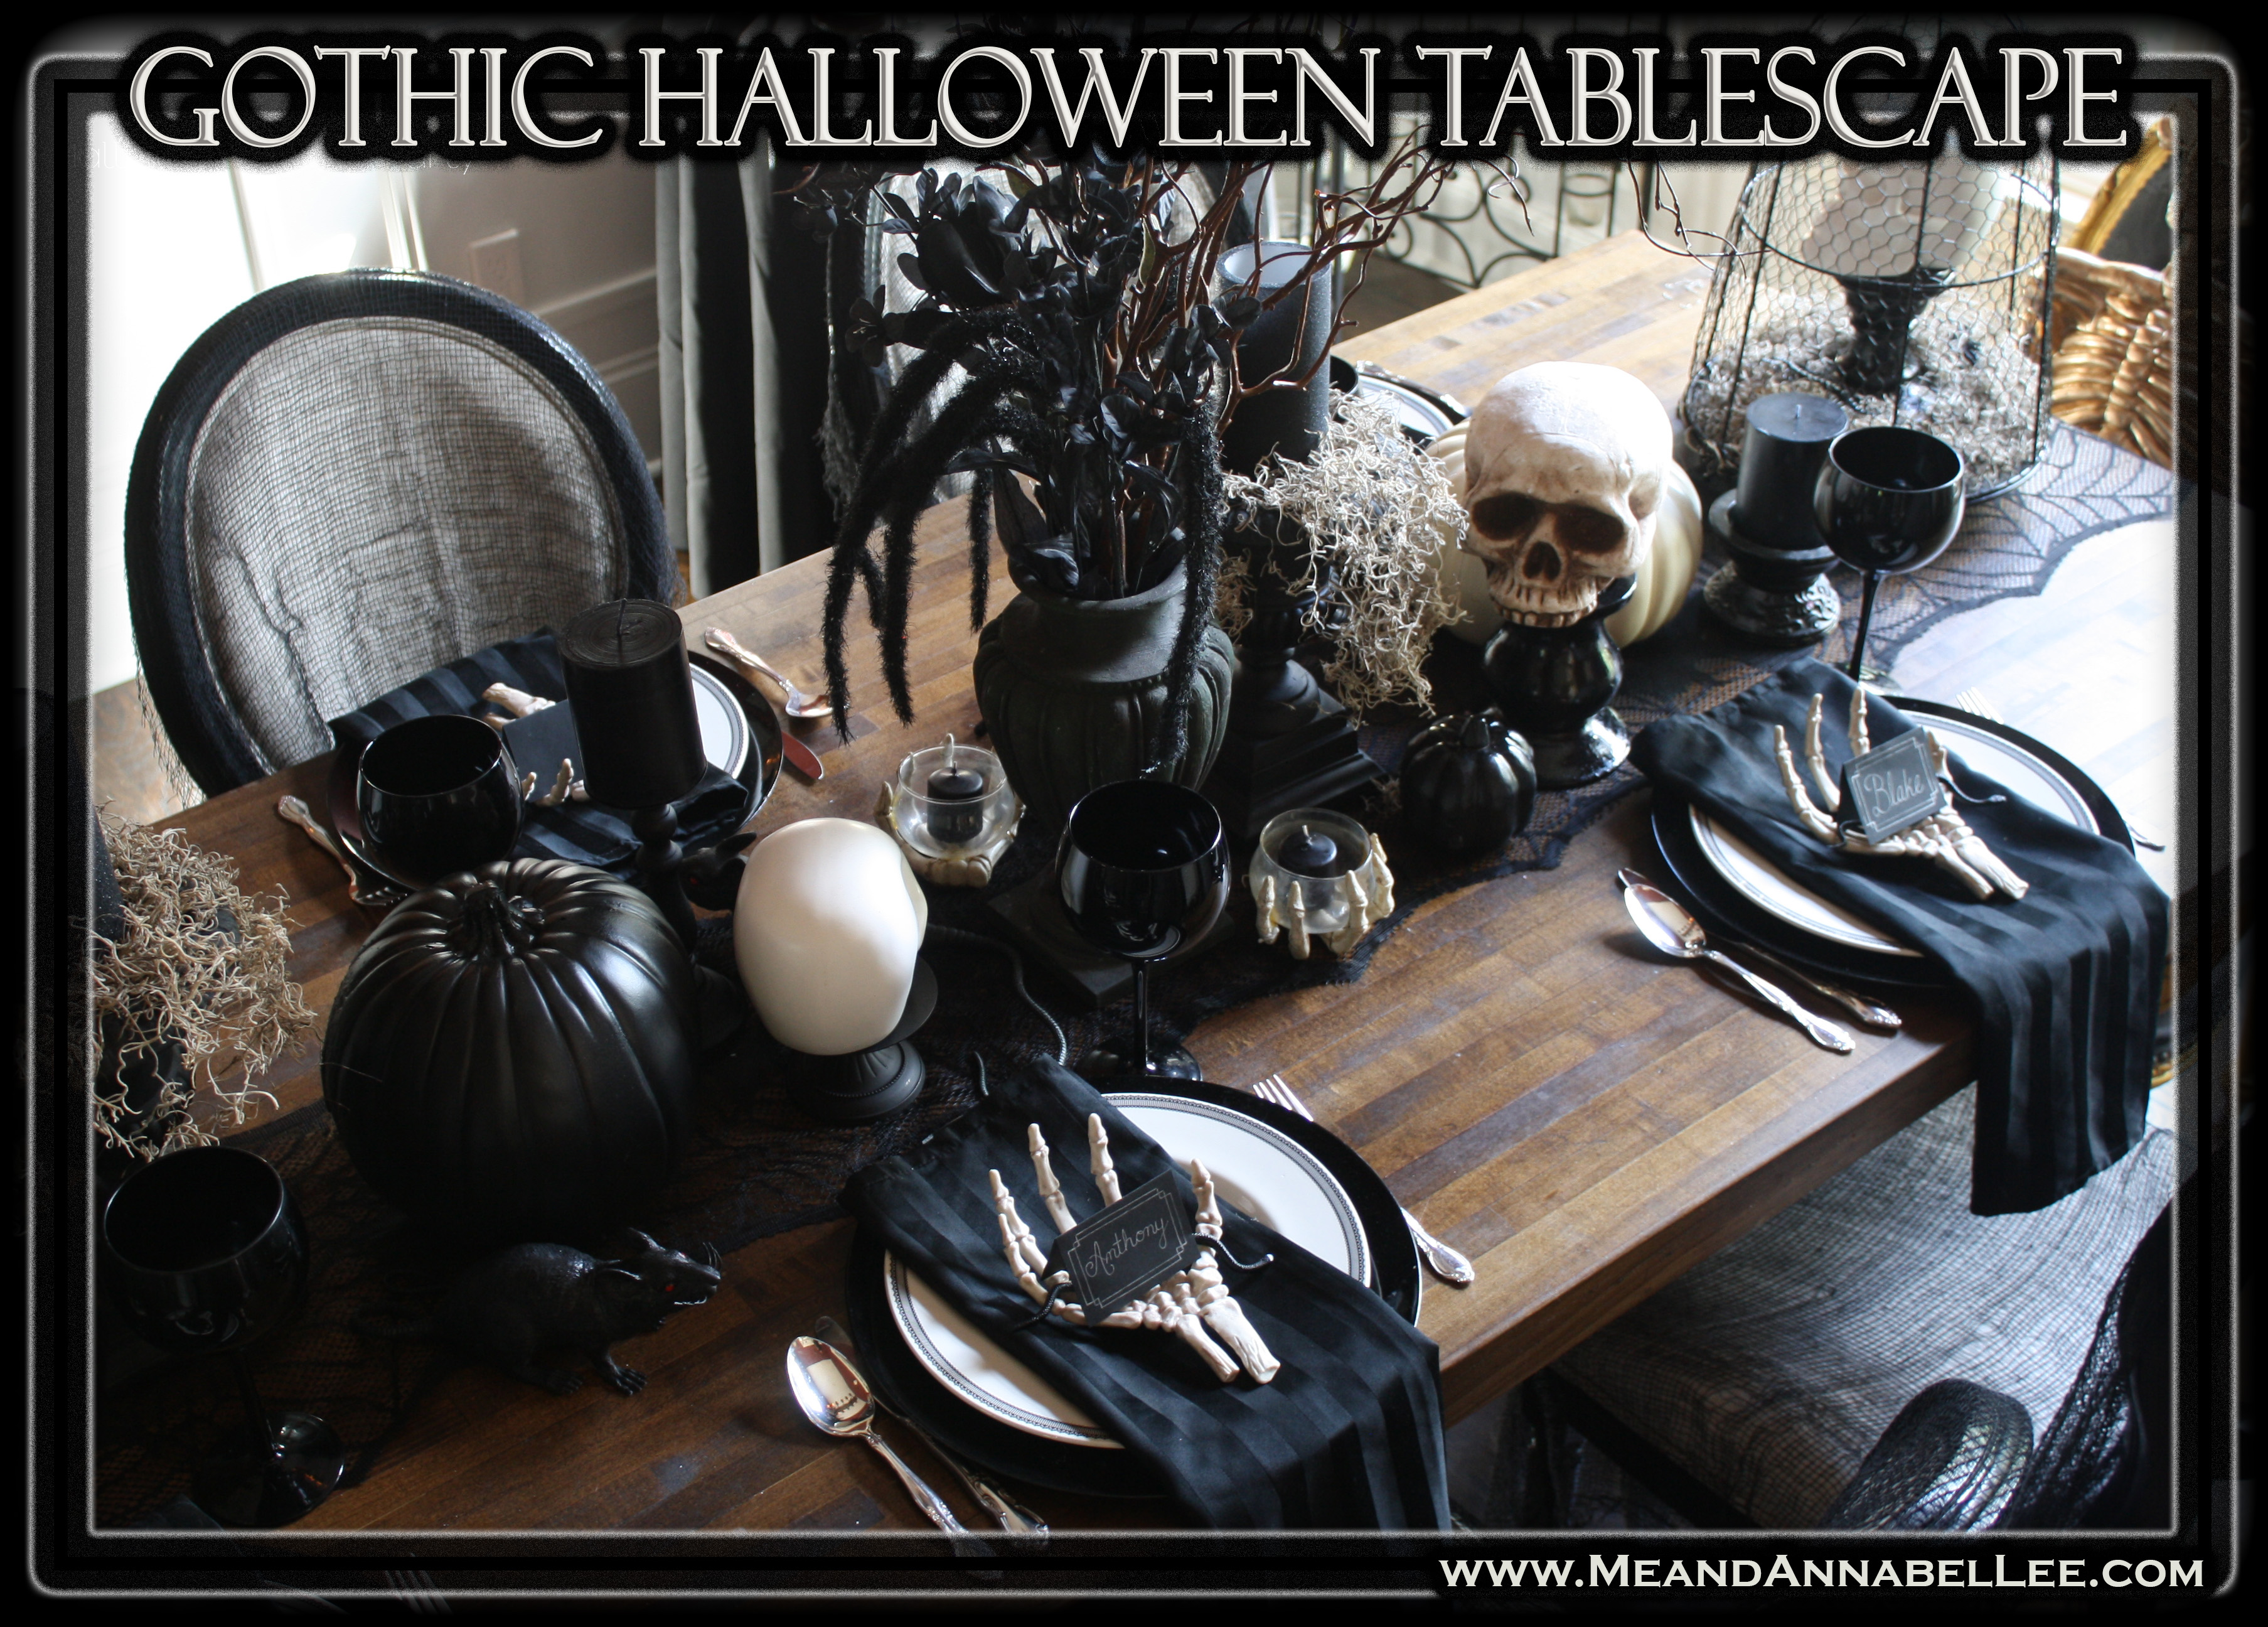 Gothic Halloween Tablescape | Dinner Party | www.MeandAnnabelLee.com